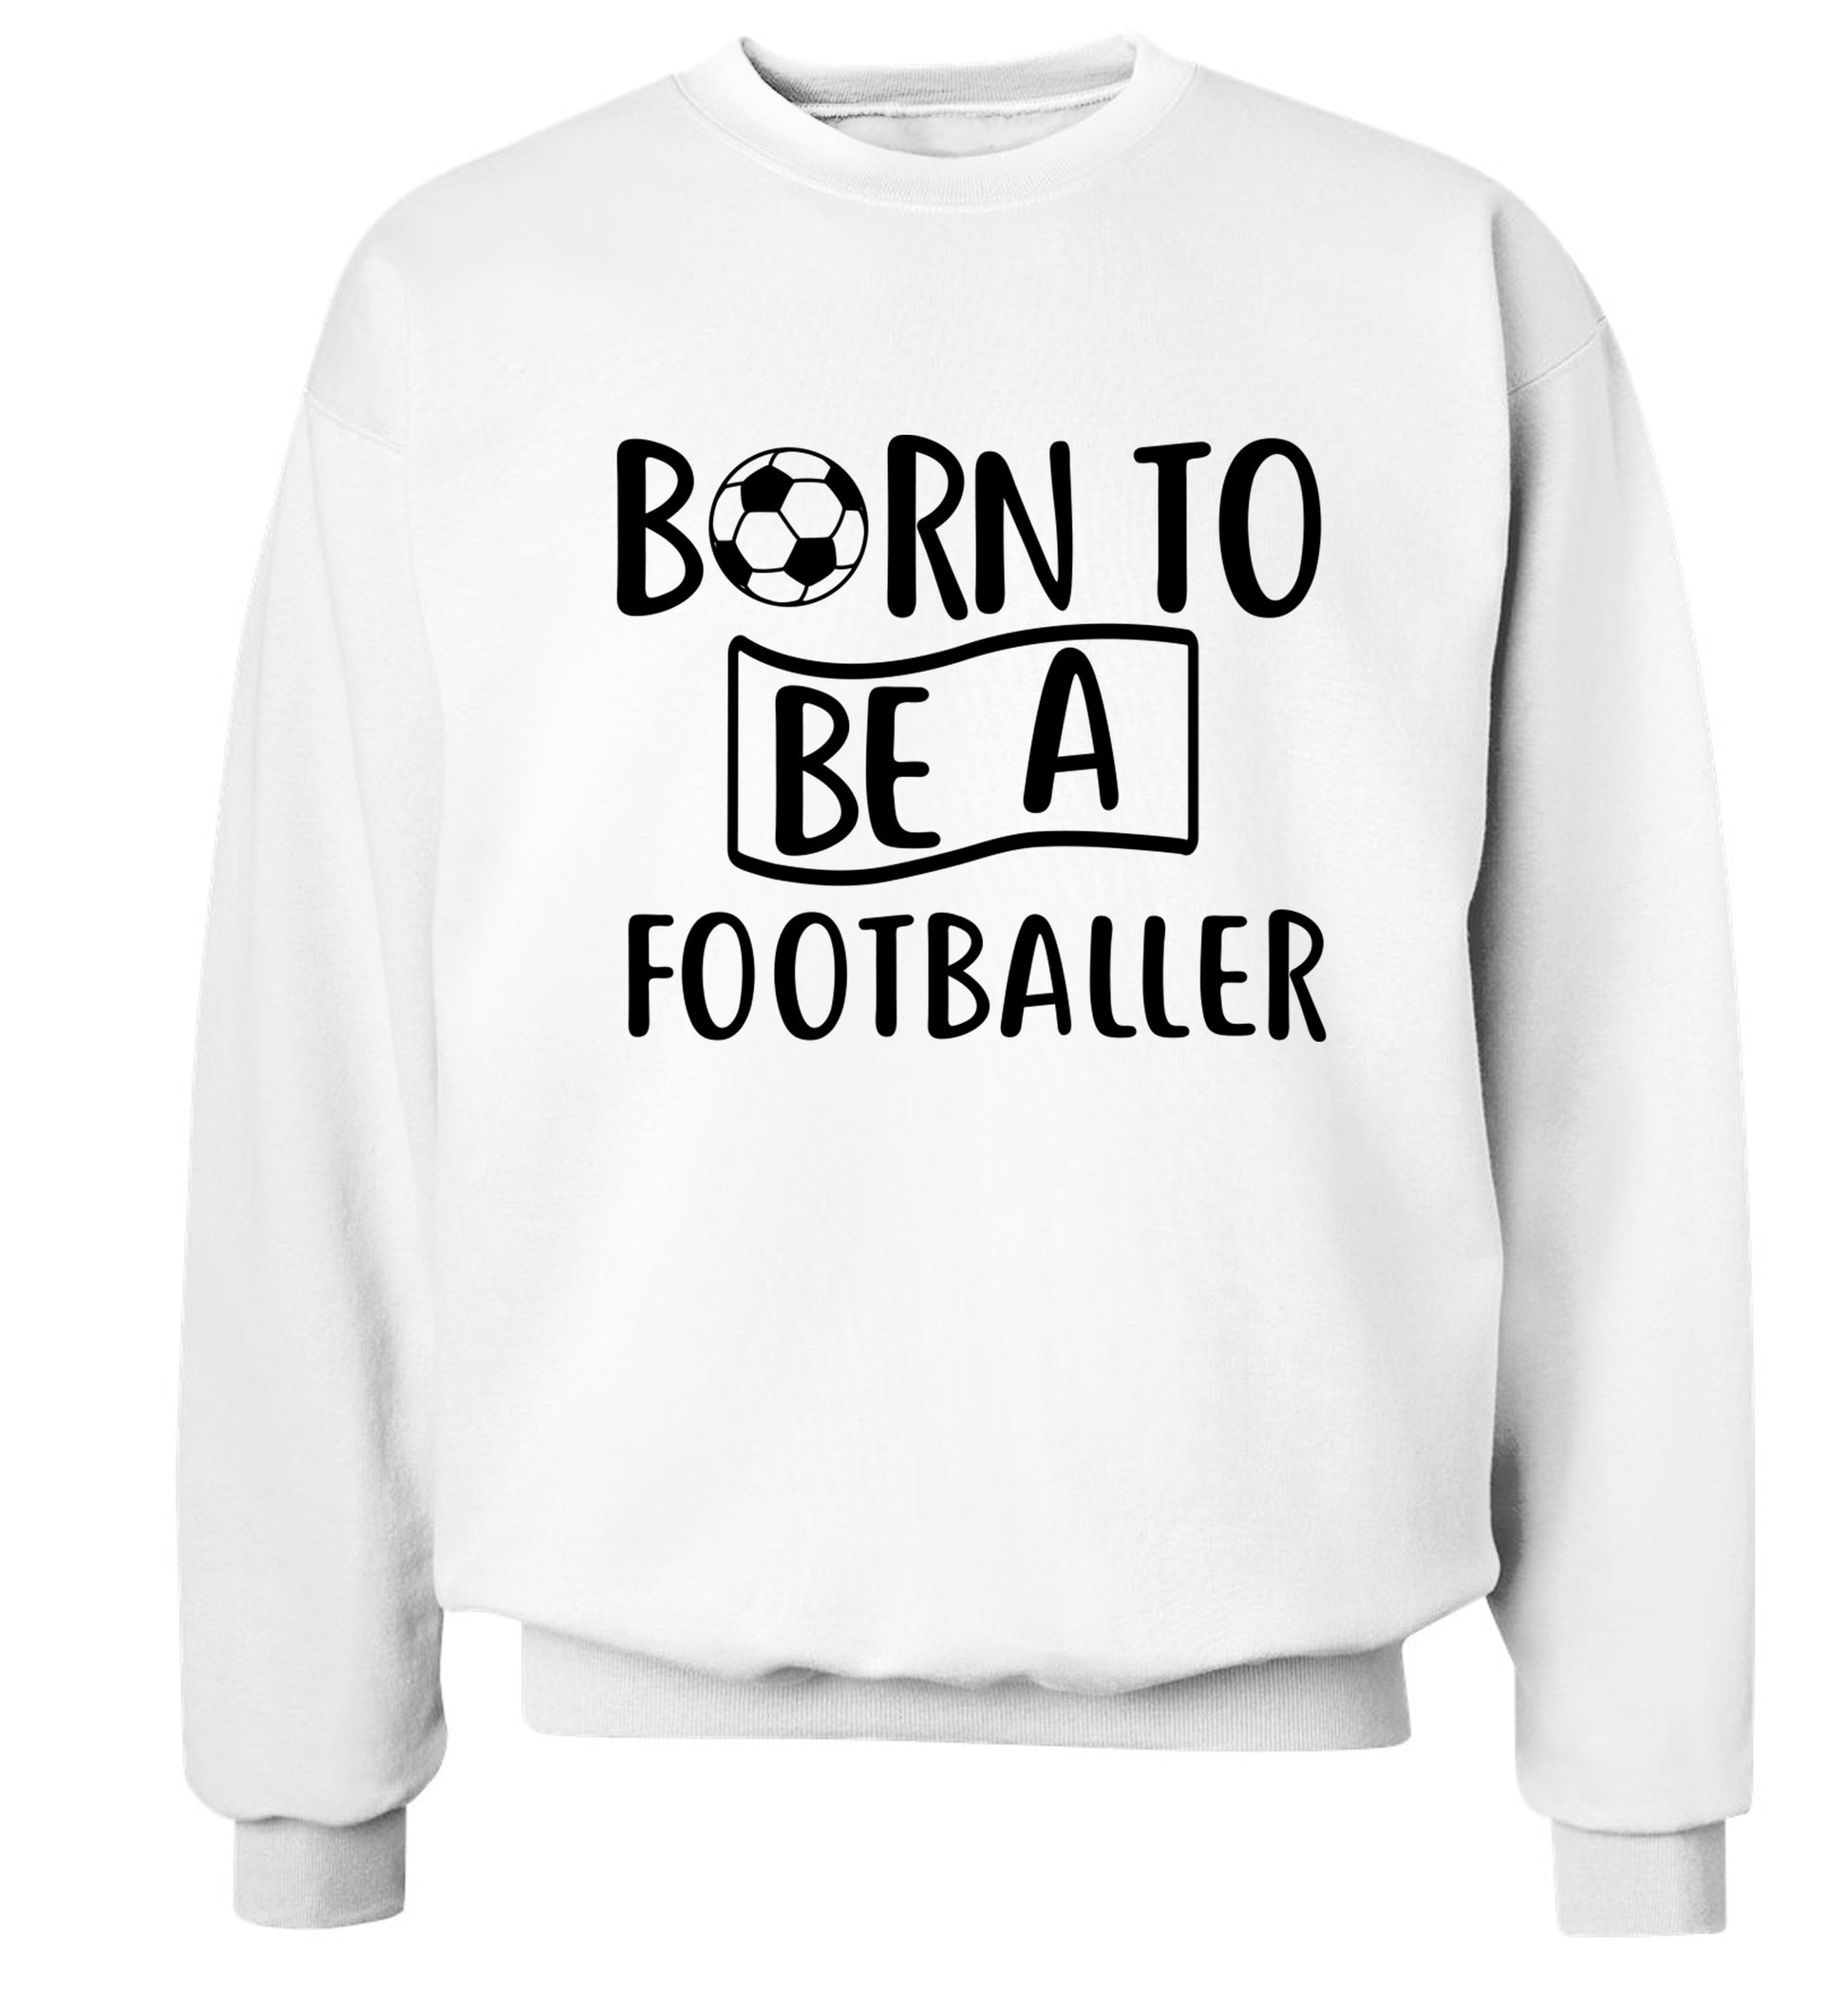 Born to be a footballer Adult's unisexwhite Sweater 2XL